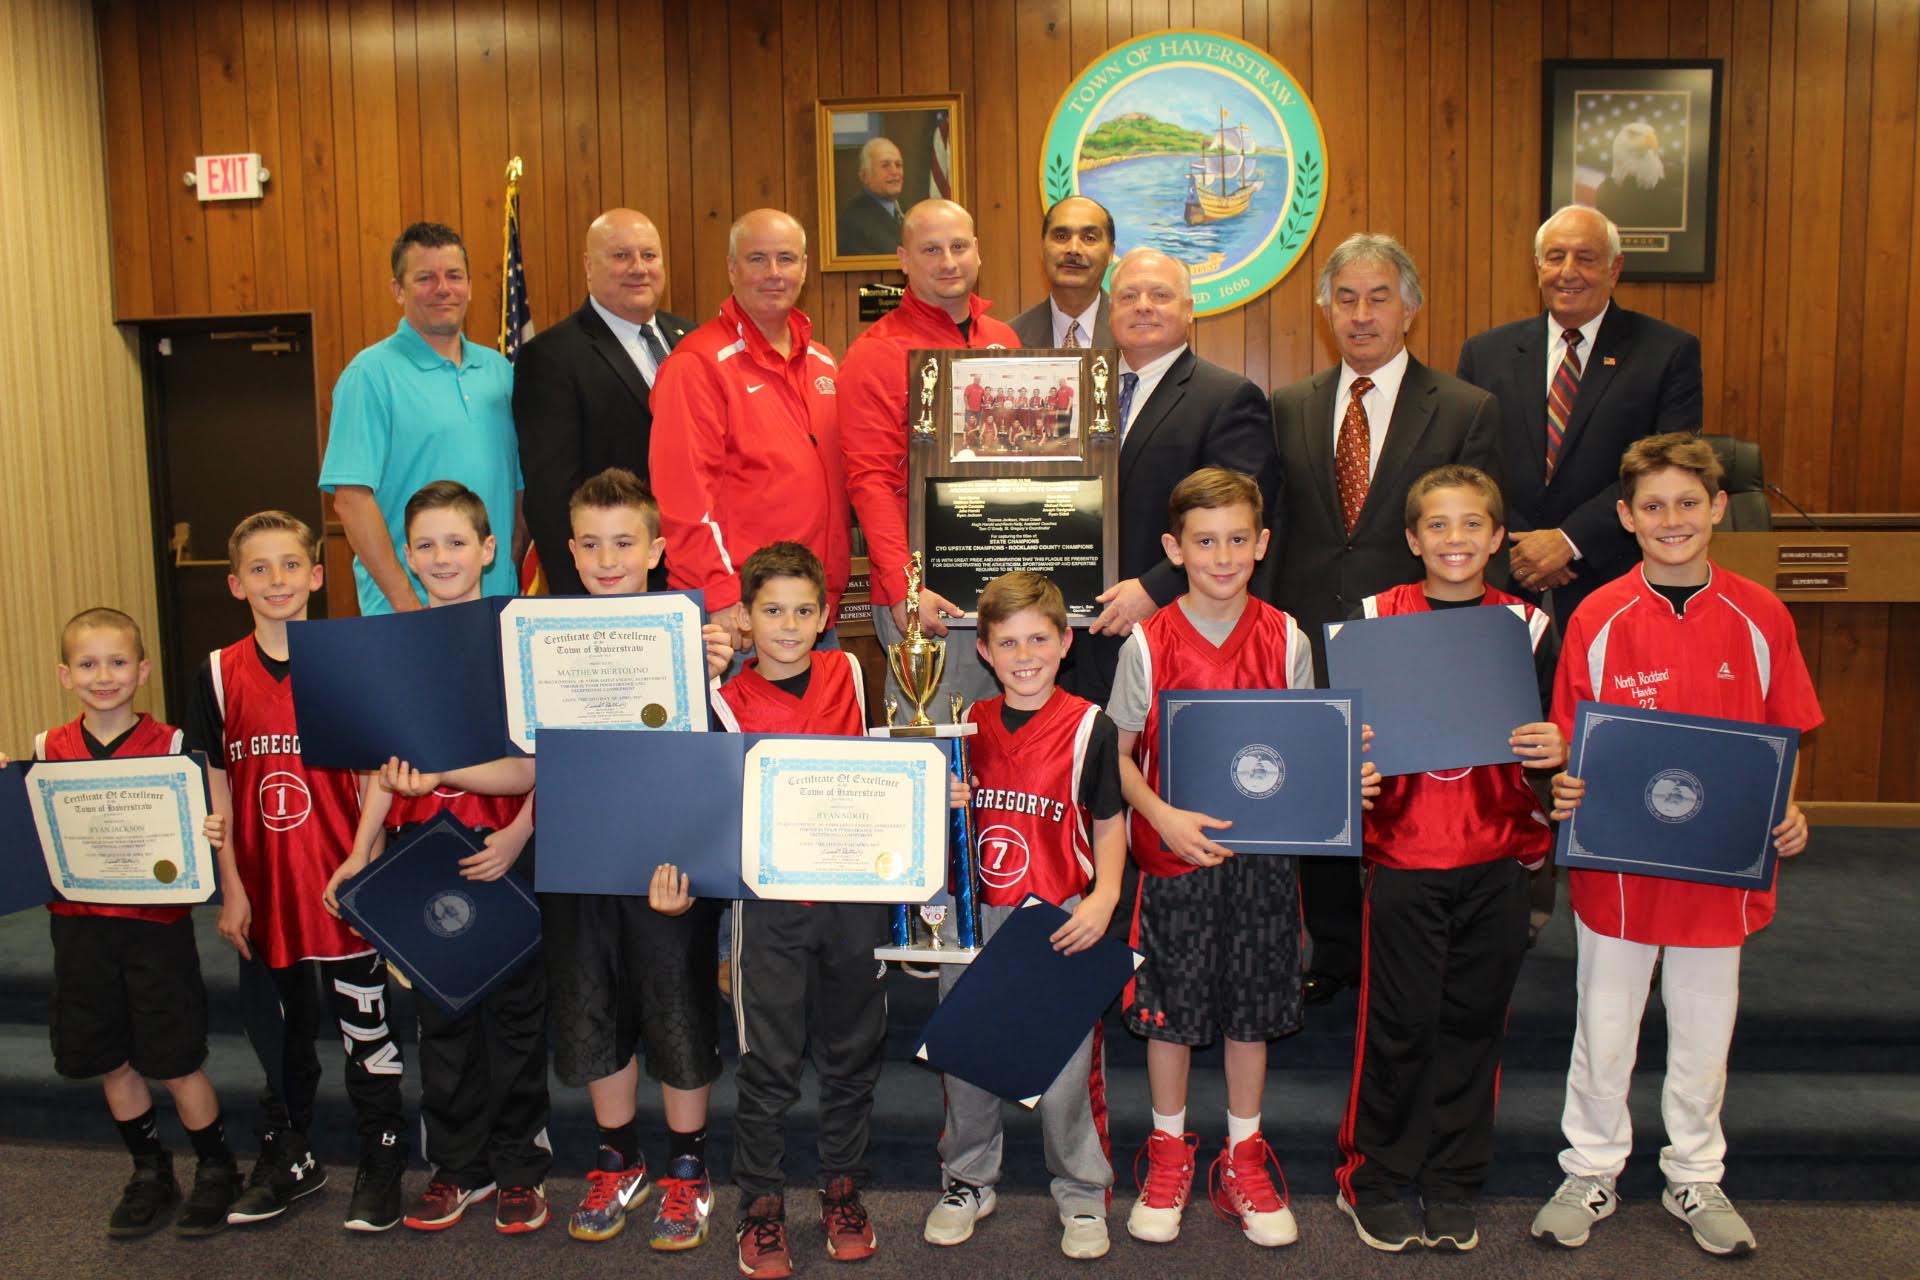 STATE CHAMPION CYO TEAM RECOGNIZED BY TOWN BOARD